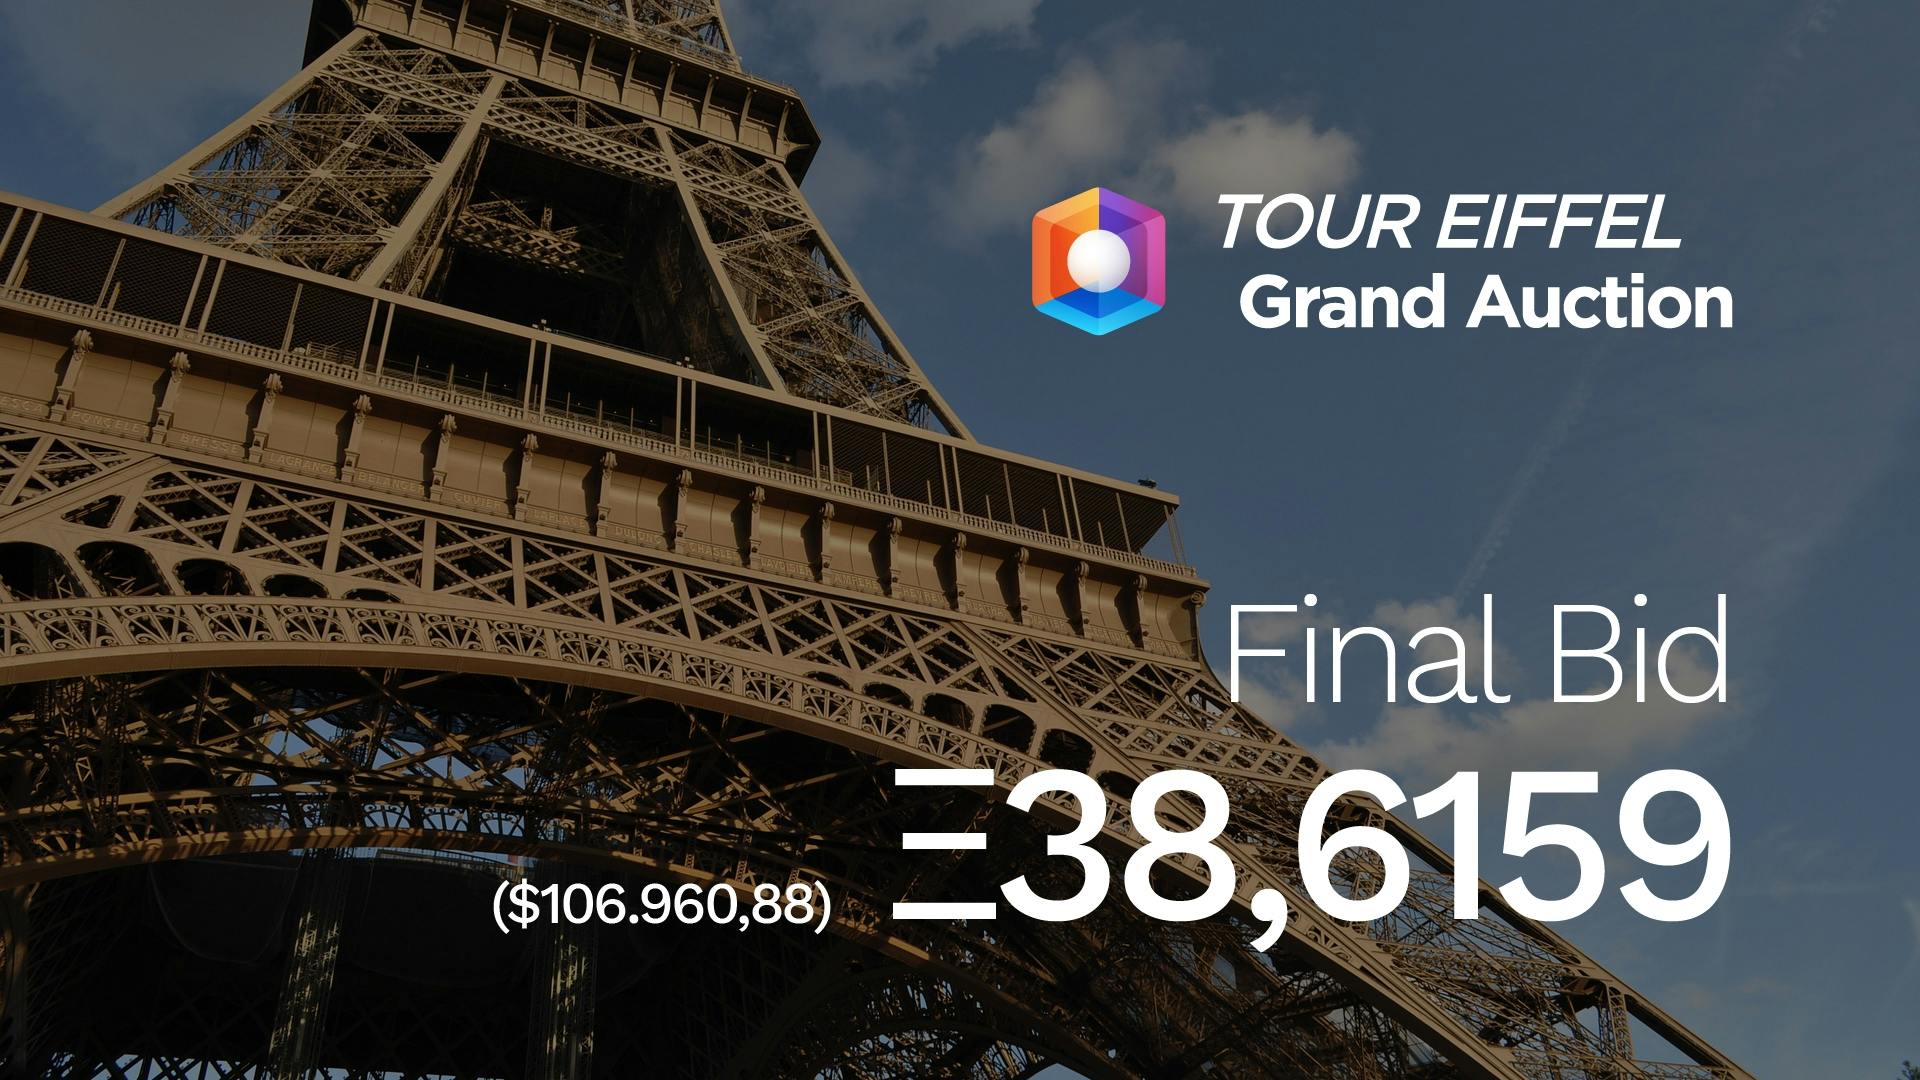 A Summary of the Eiffel Tower Grand Auction